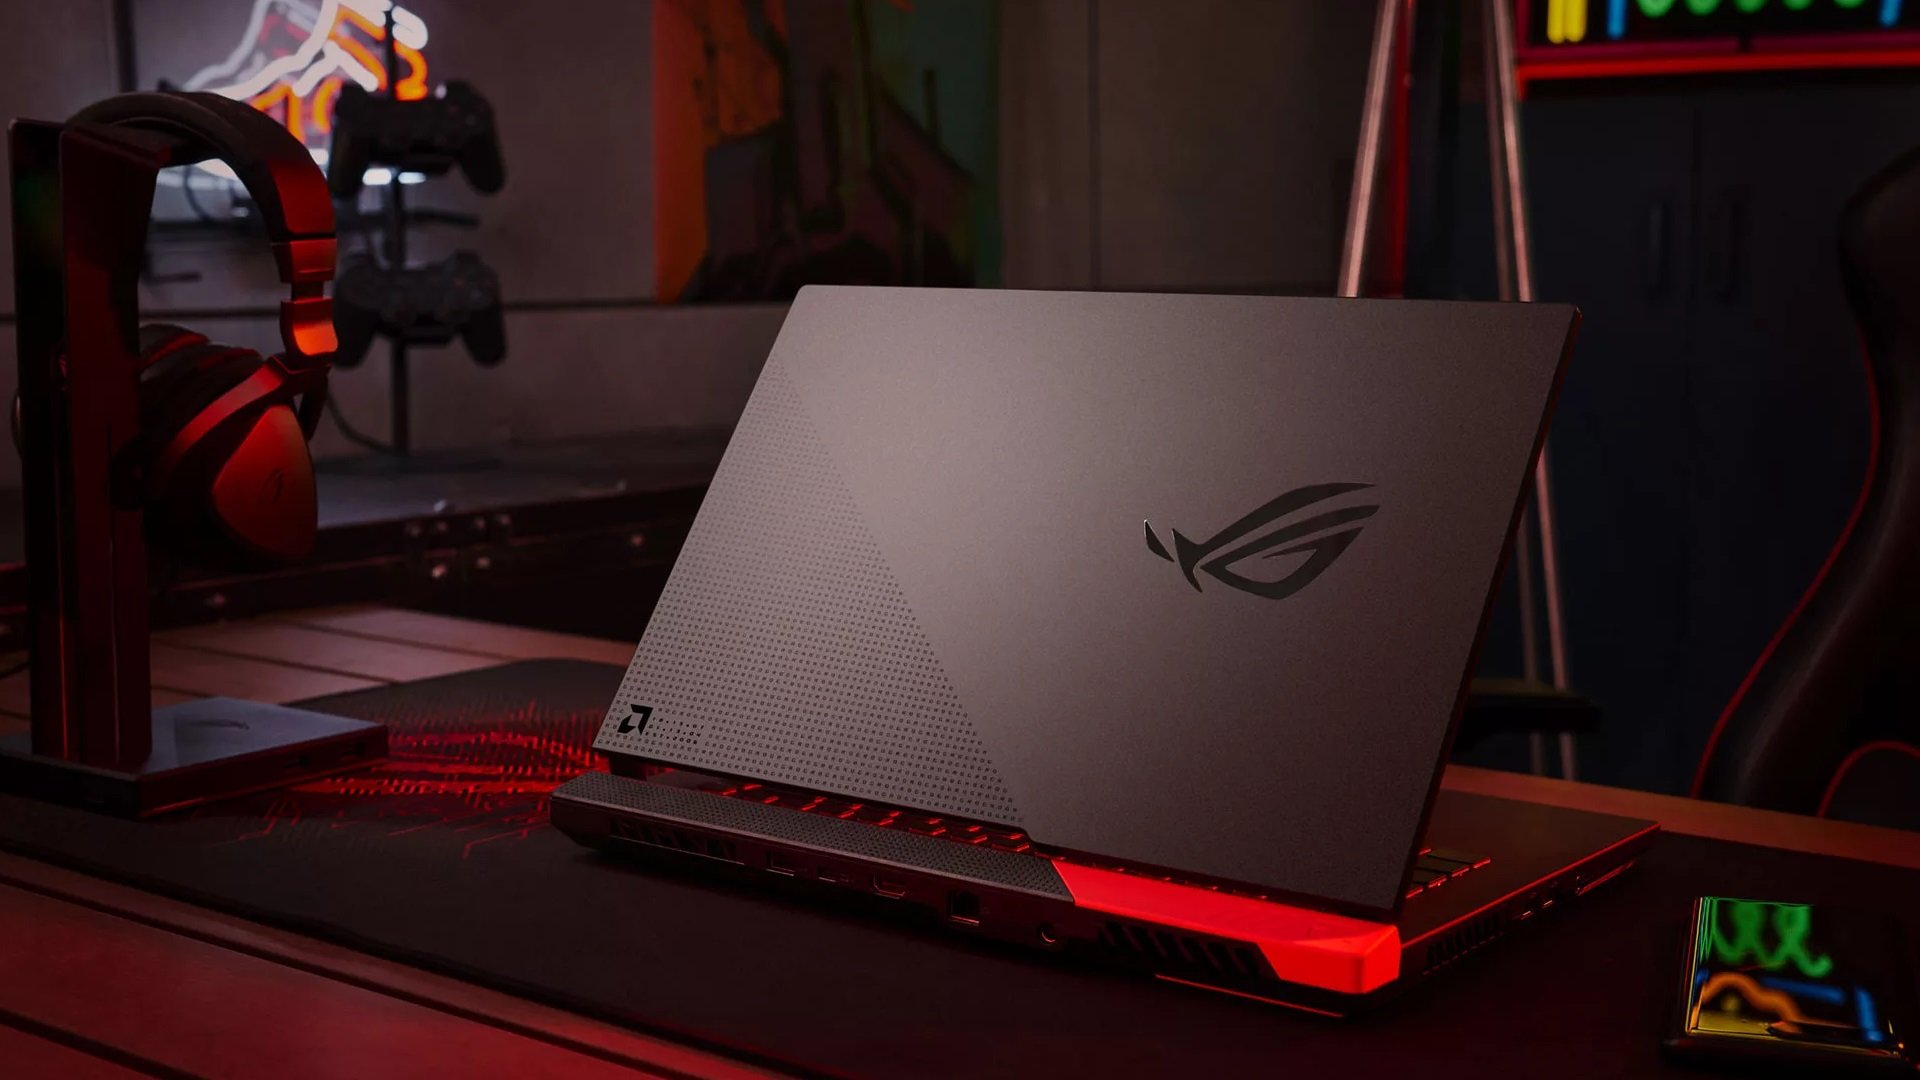 Gaming laptops, the best. Which one do you have? Best for a